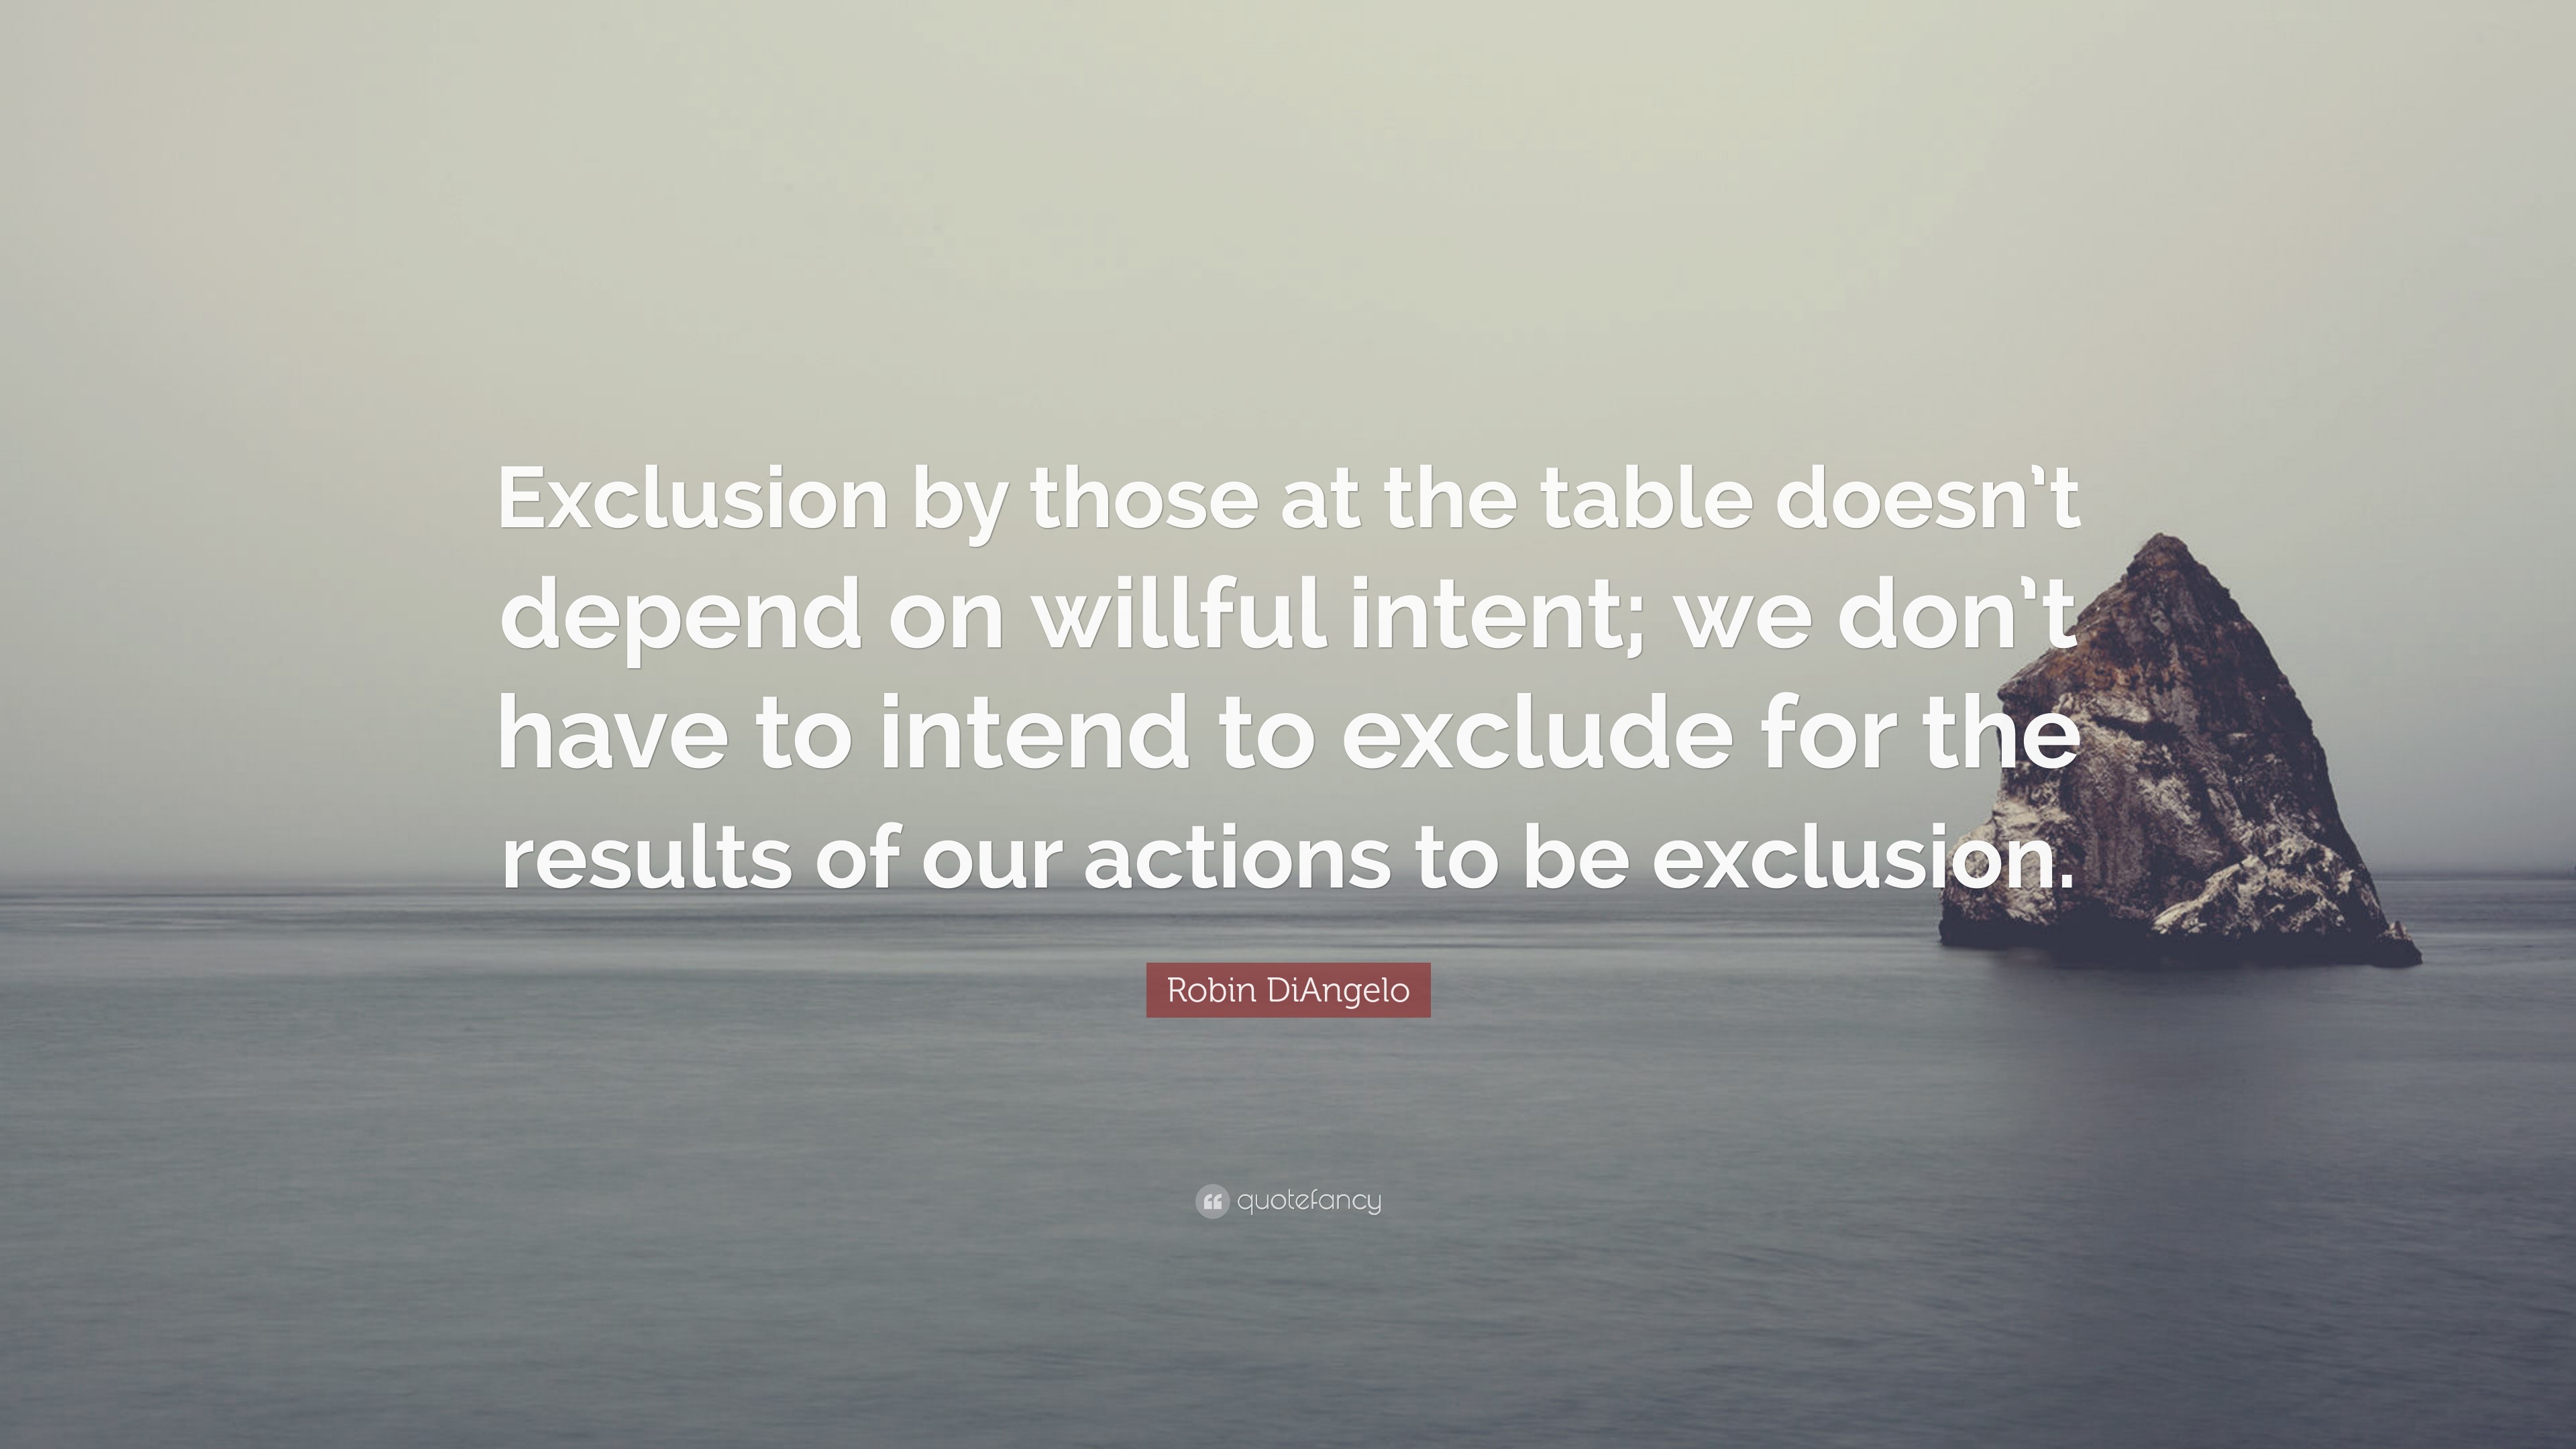 Robin DiAngelo Quote: “Exclusion by those at the table doesn't depend on  willful intent; we don't have to intend to exclude for the results of ”